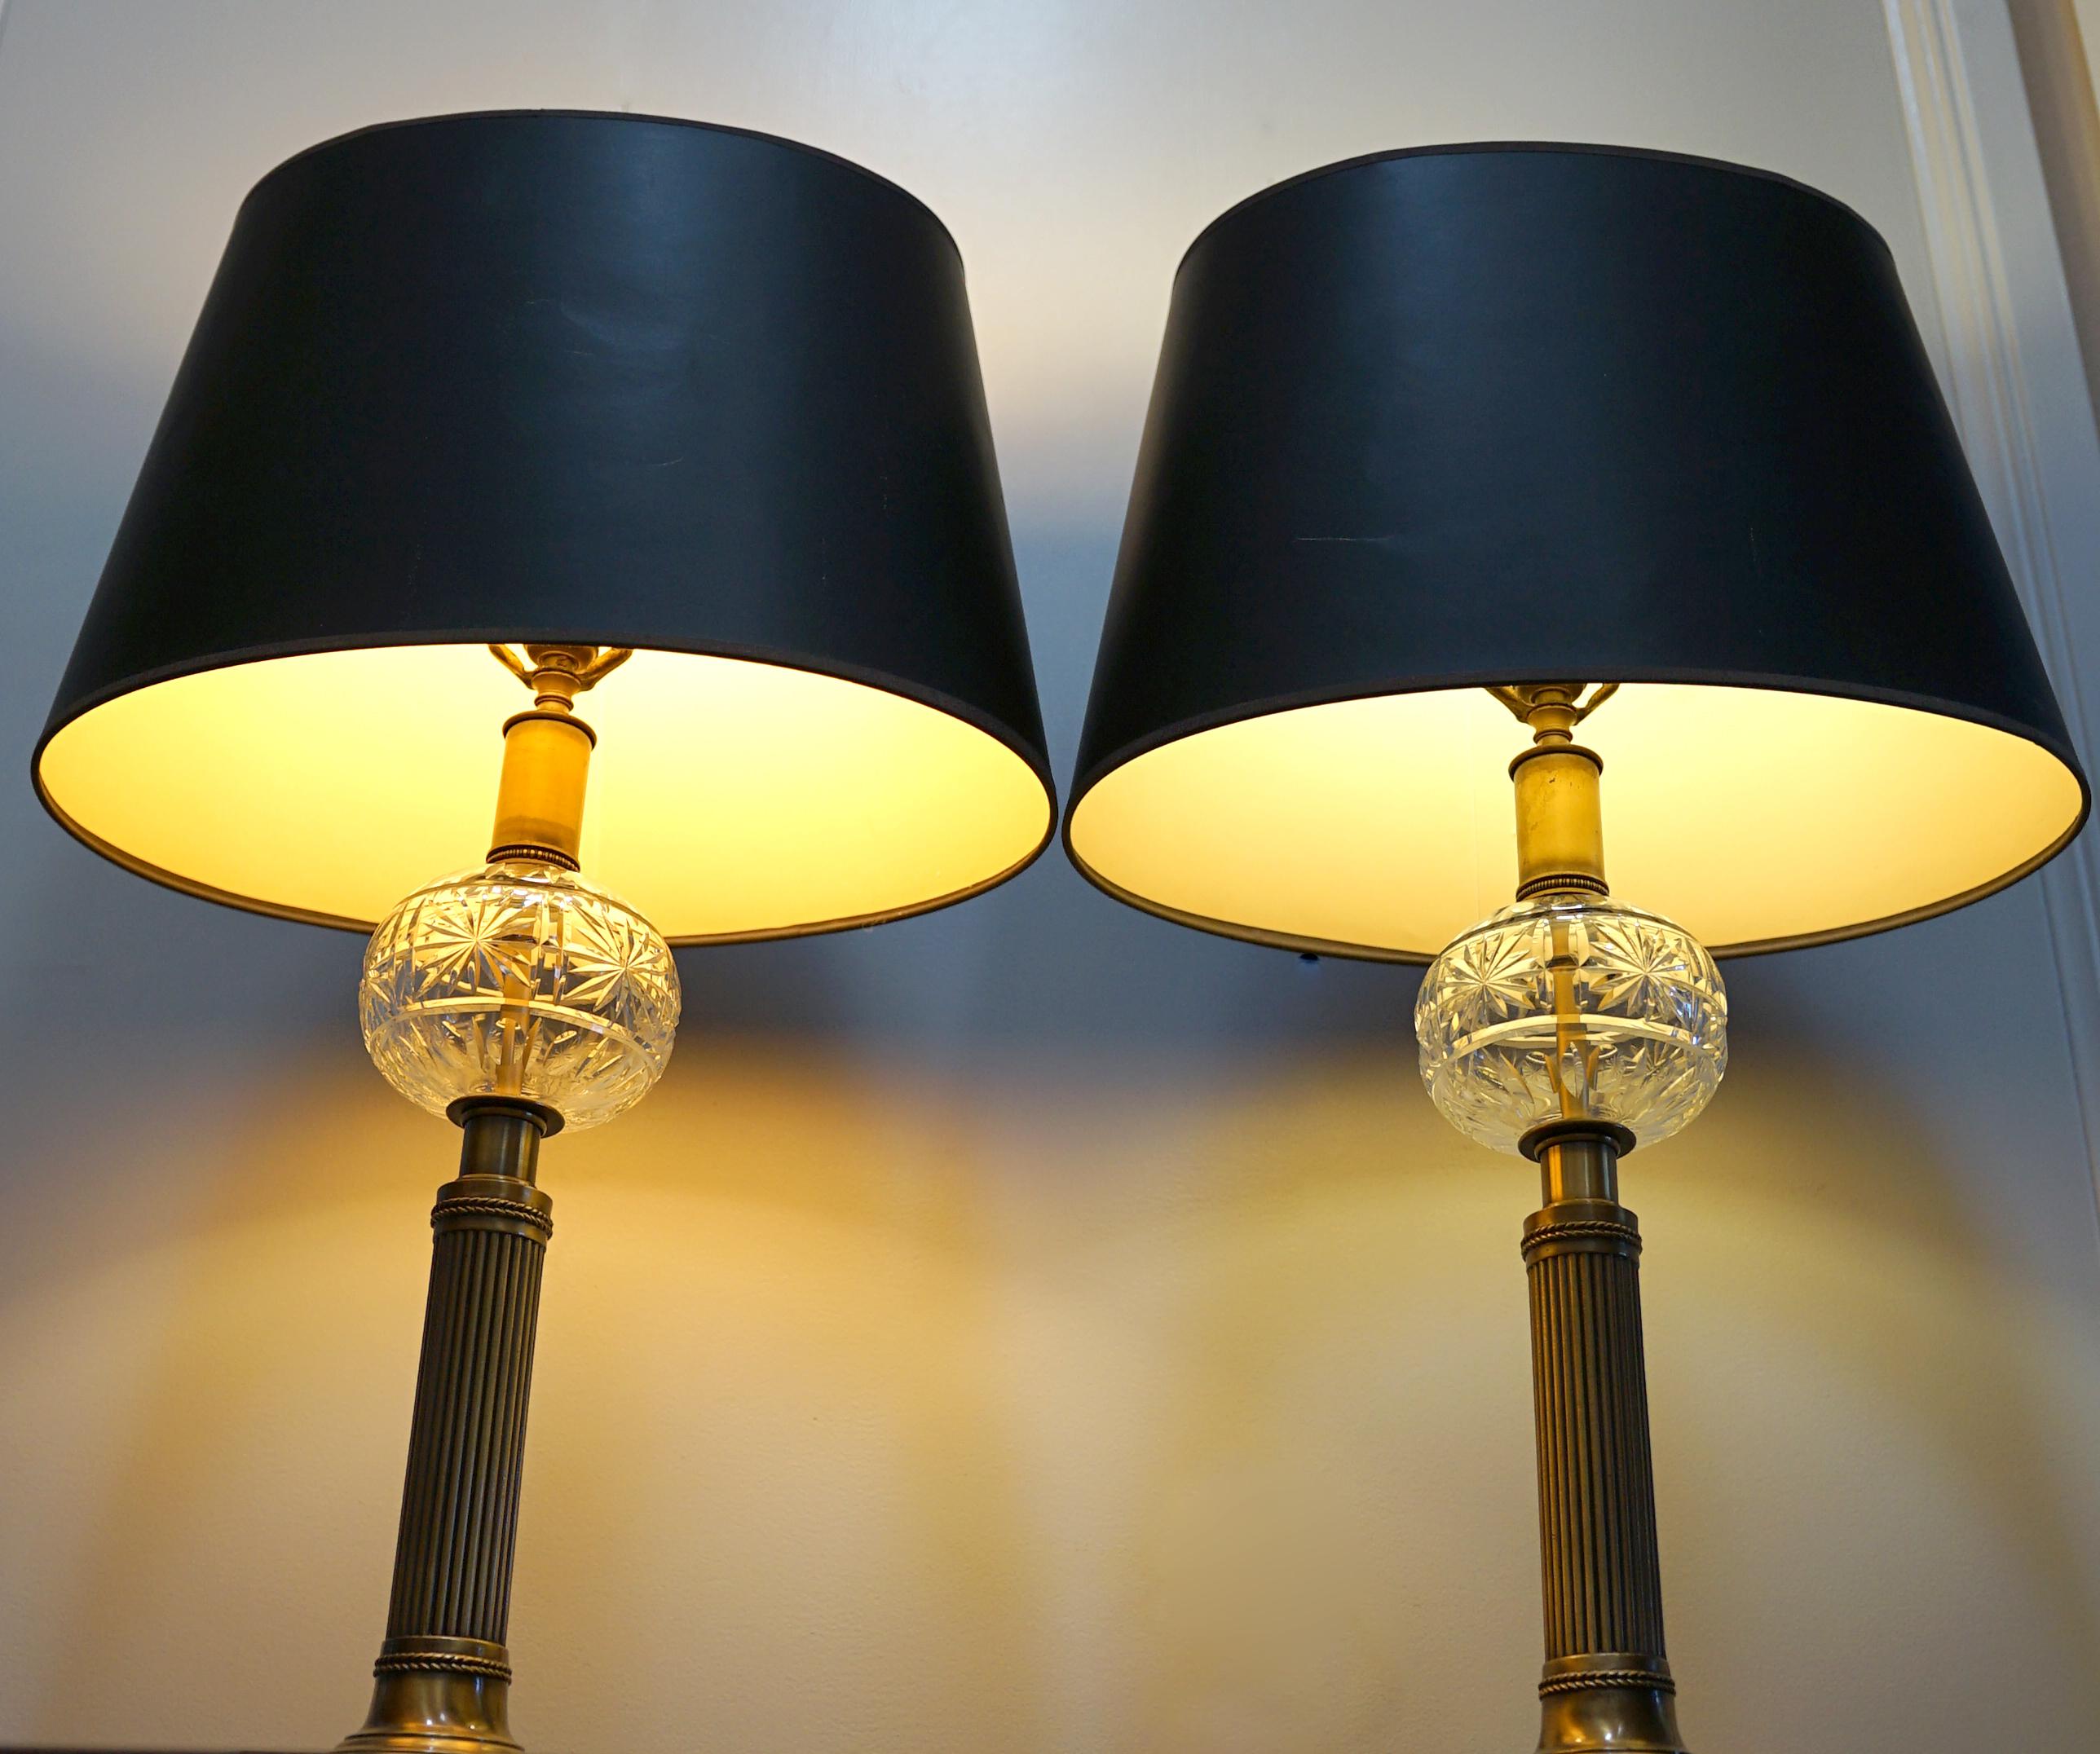 The Neoclassical Revival style crystal pillar lamps fit into various design themes. The lamps are also reminiscent of a Victorian set of vintage lamps with a reservoir. However, these very handsome lamps don't have the age of the English Victorians